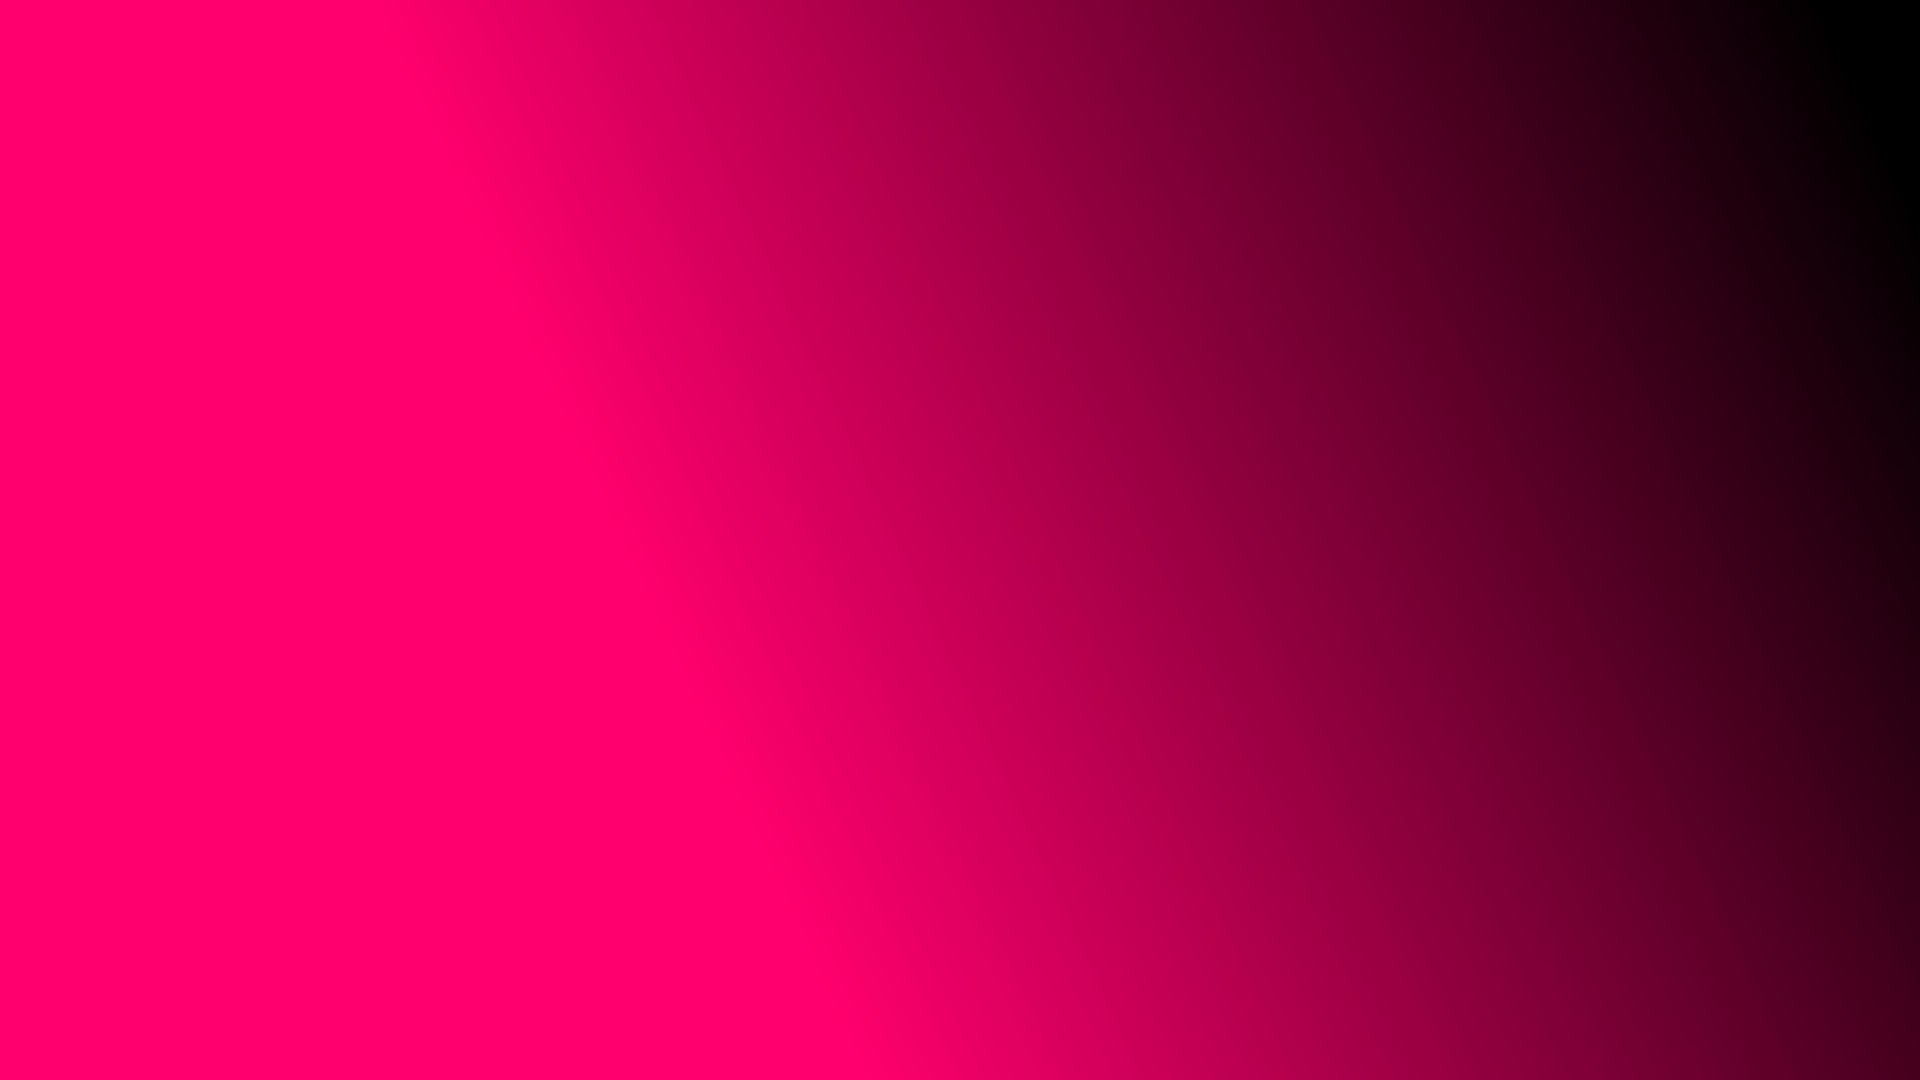 69 Pink and Black Wallpaper Backgrounds